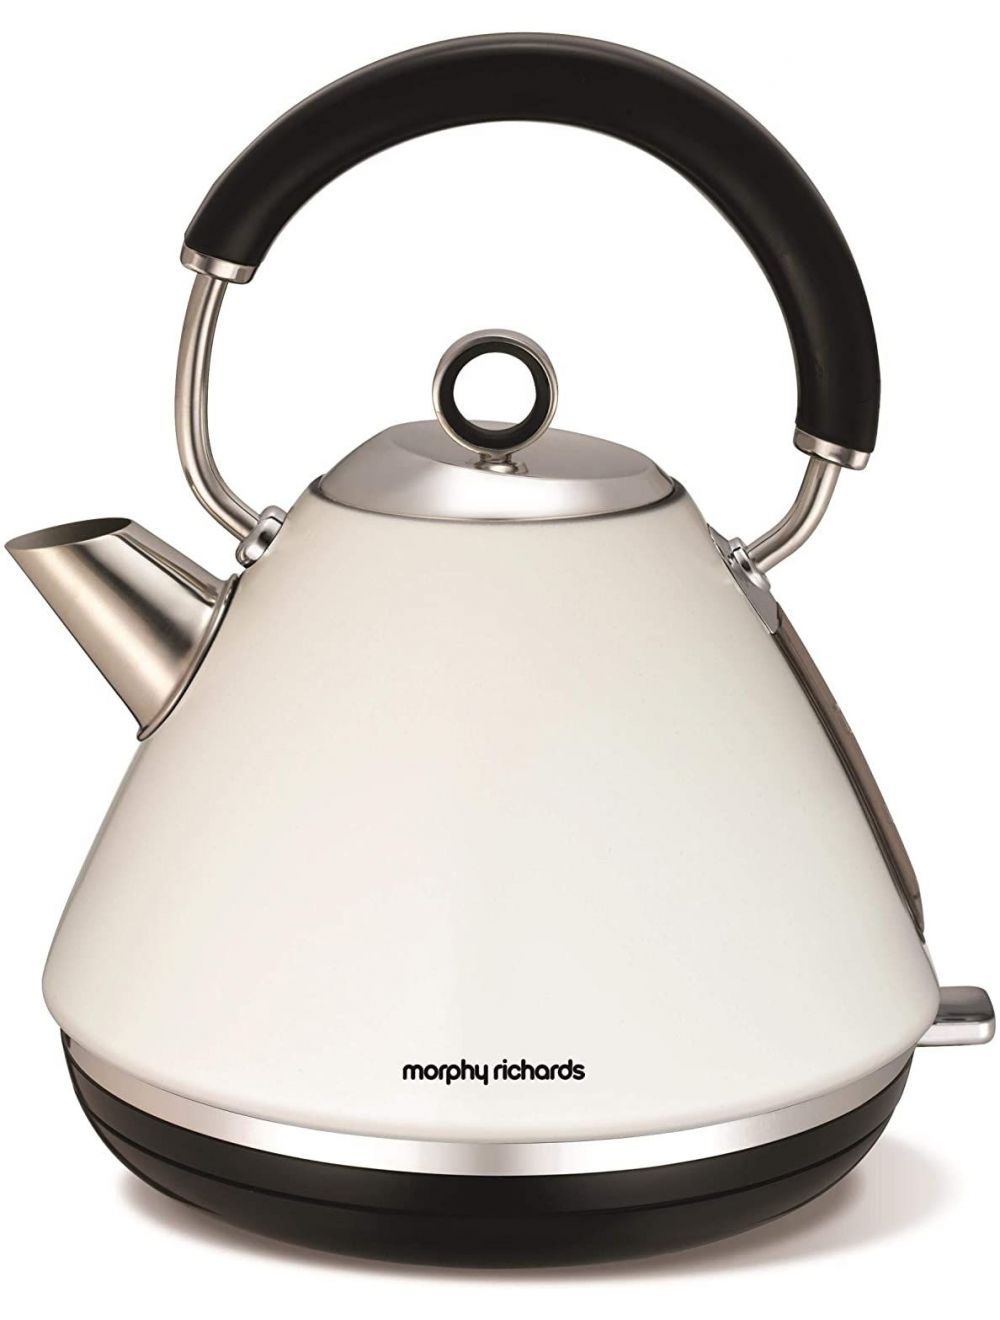 Morphy Richards Accents Pyramid Kettle, 1.5 L - White-102005